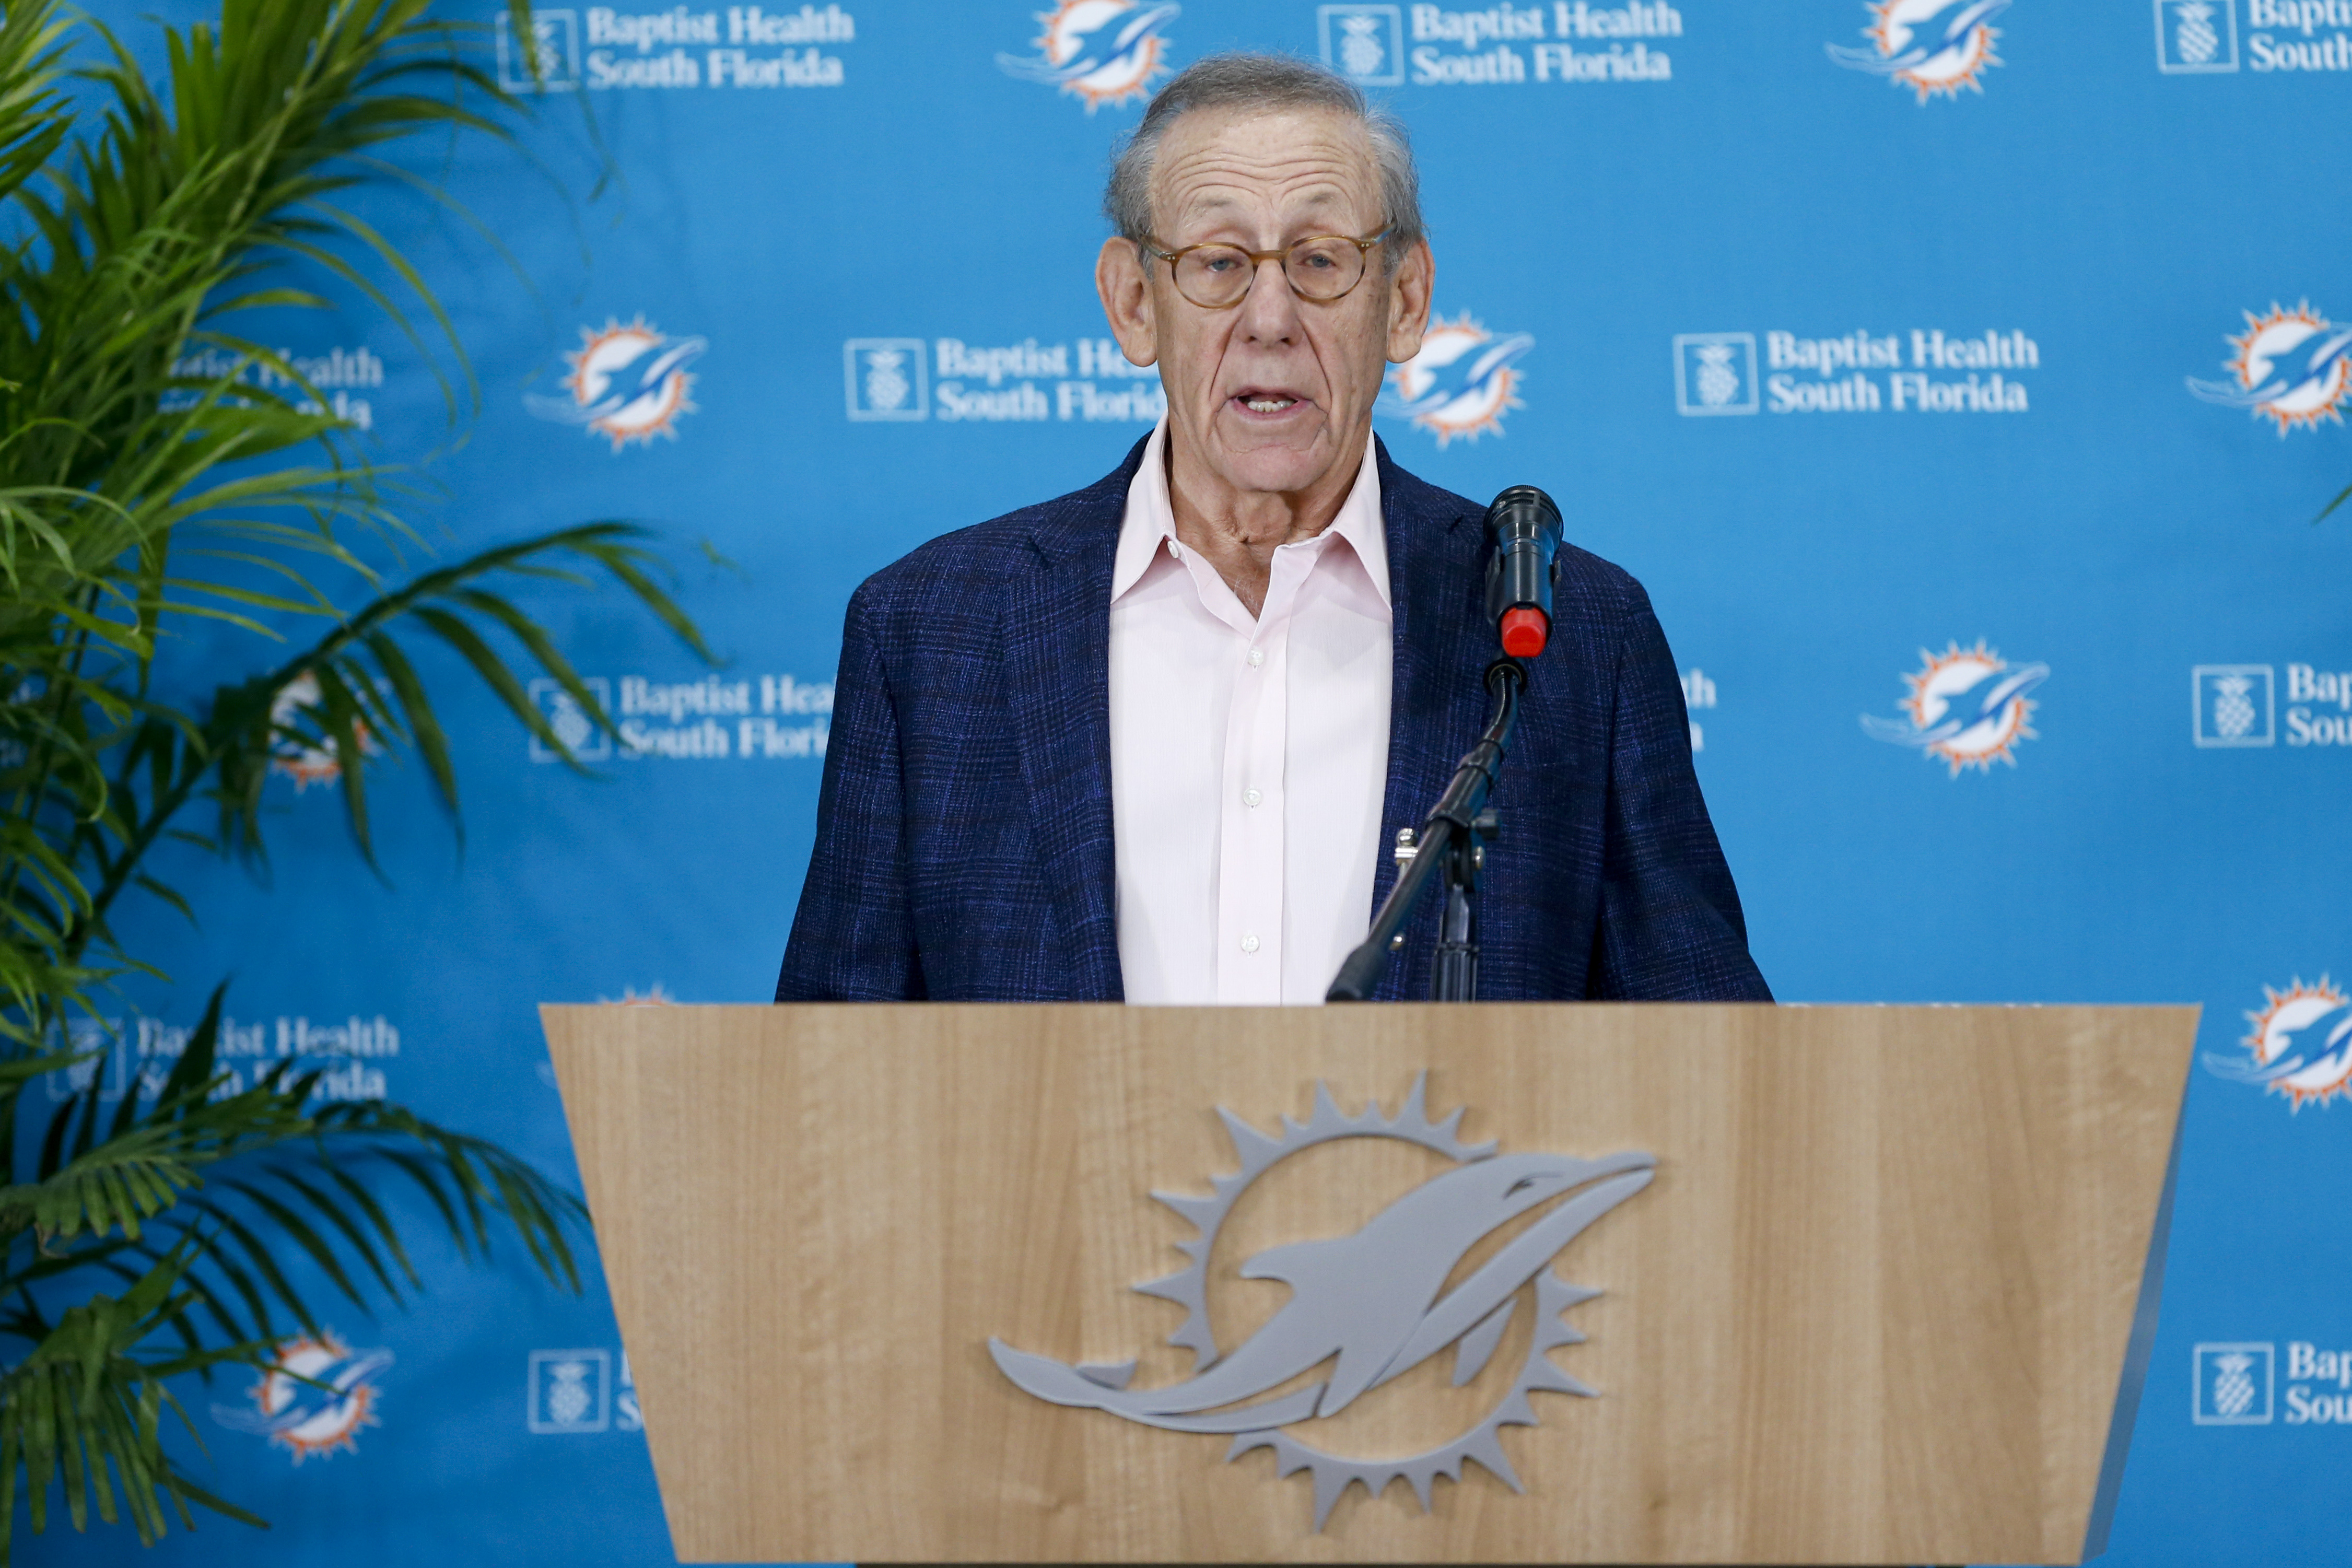 Miami Dolphins Docked Draft Picks, owner suspended for tampering